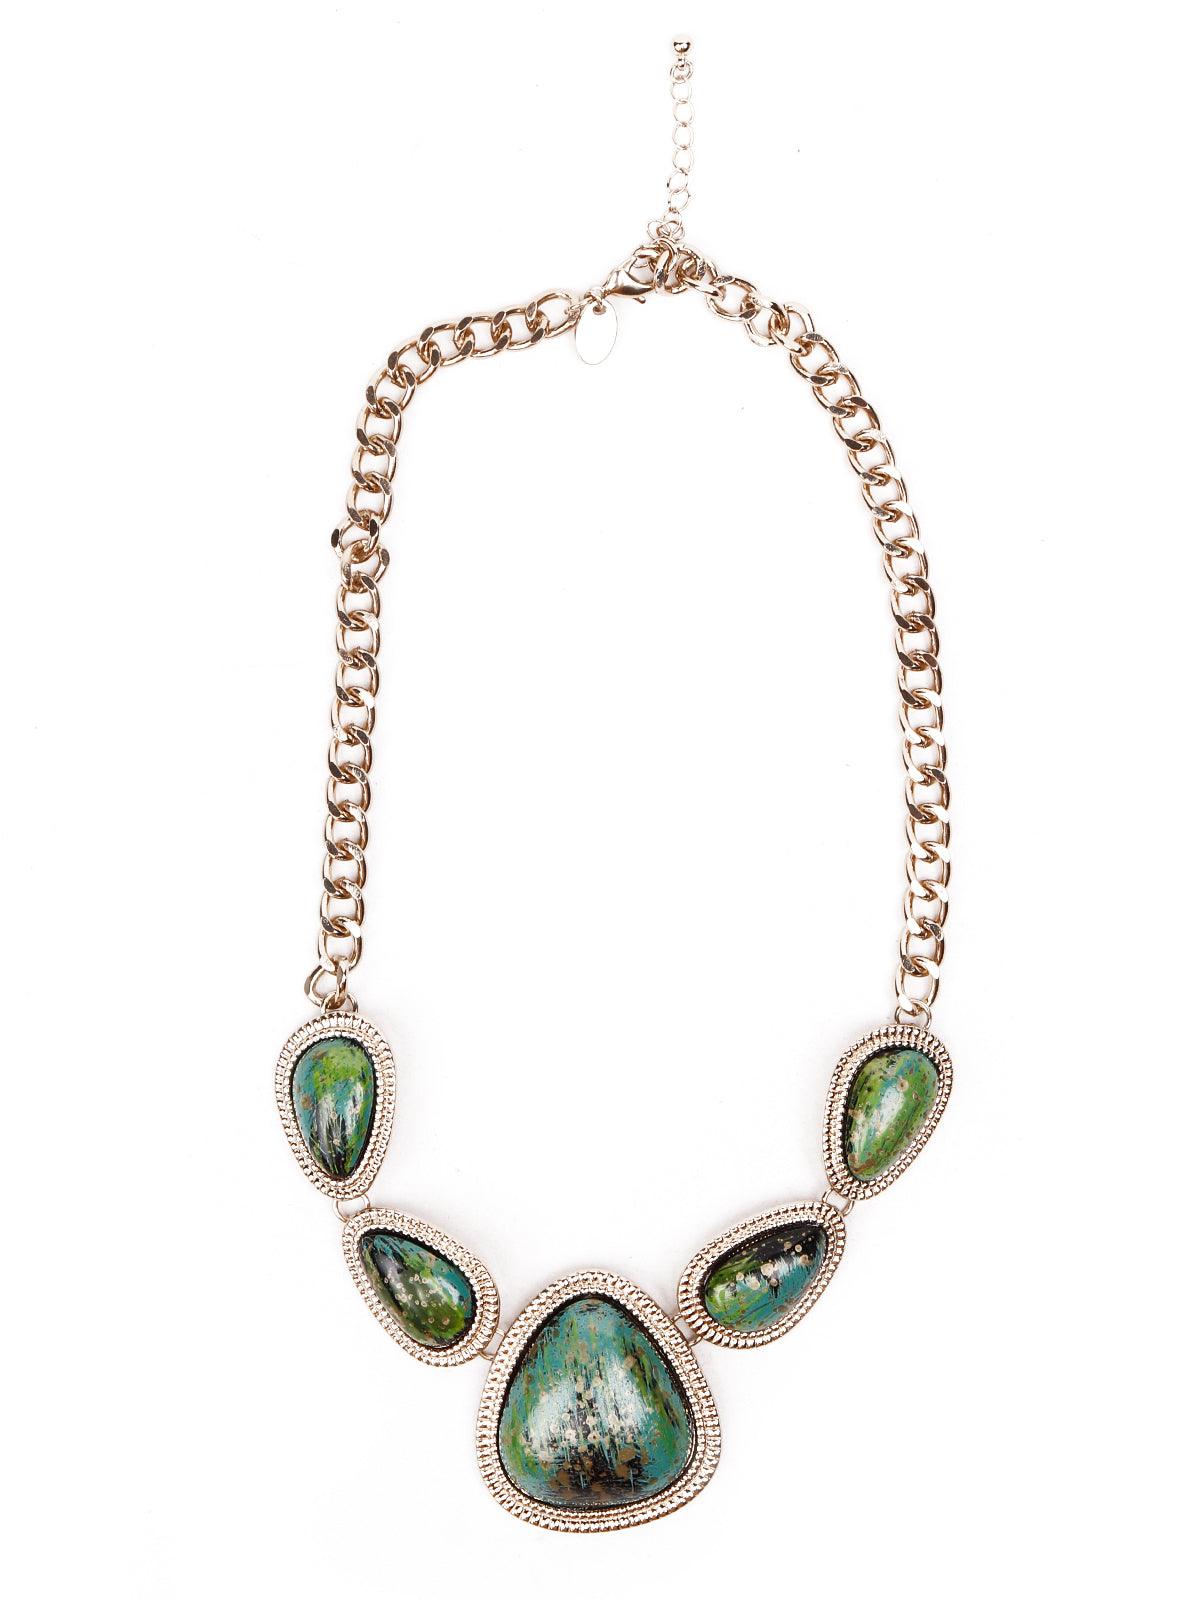 Buy Turquoise green textured stone statement necklace Online. – Odette